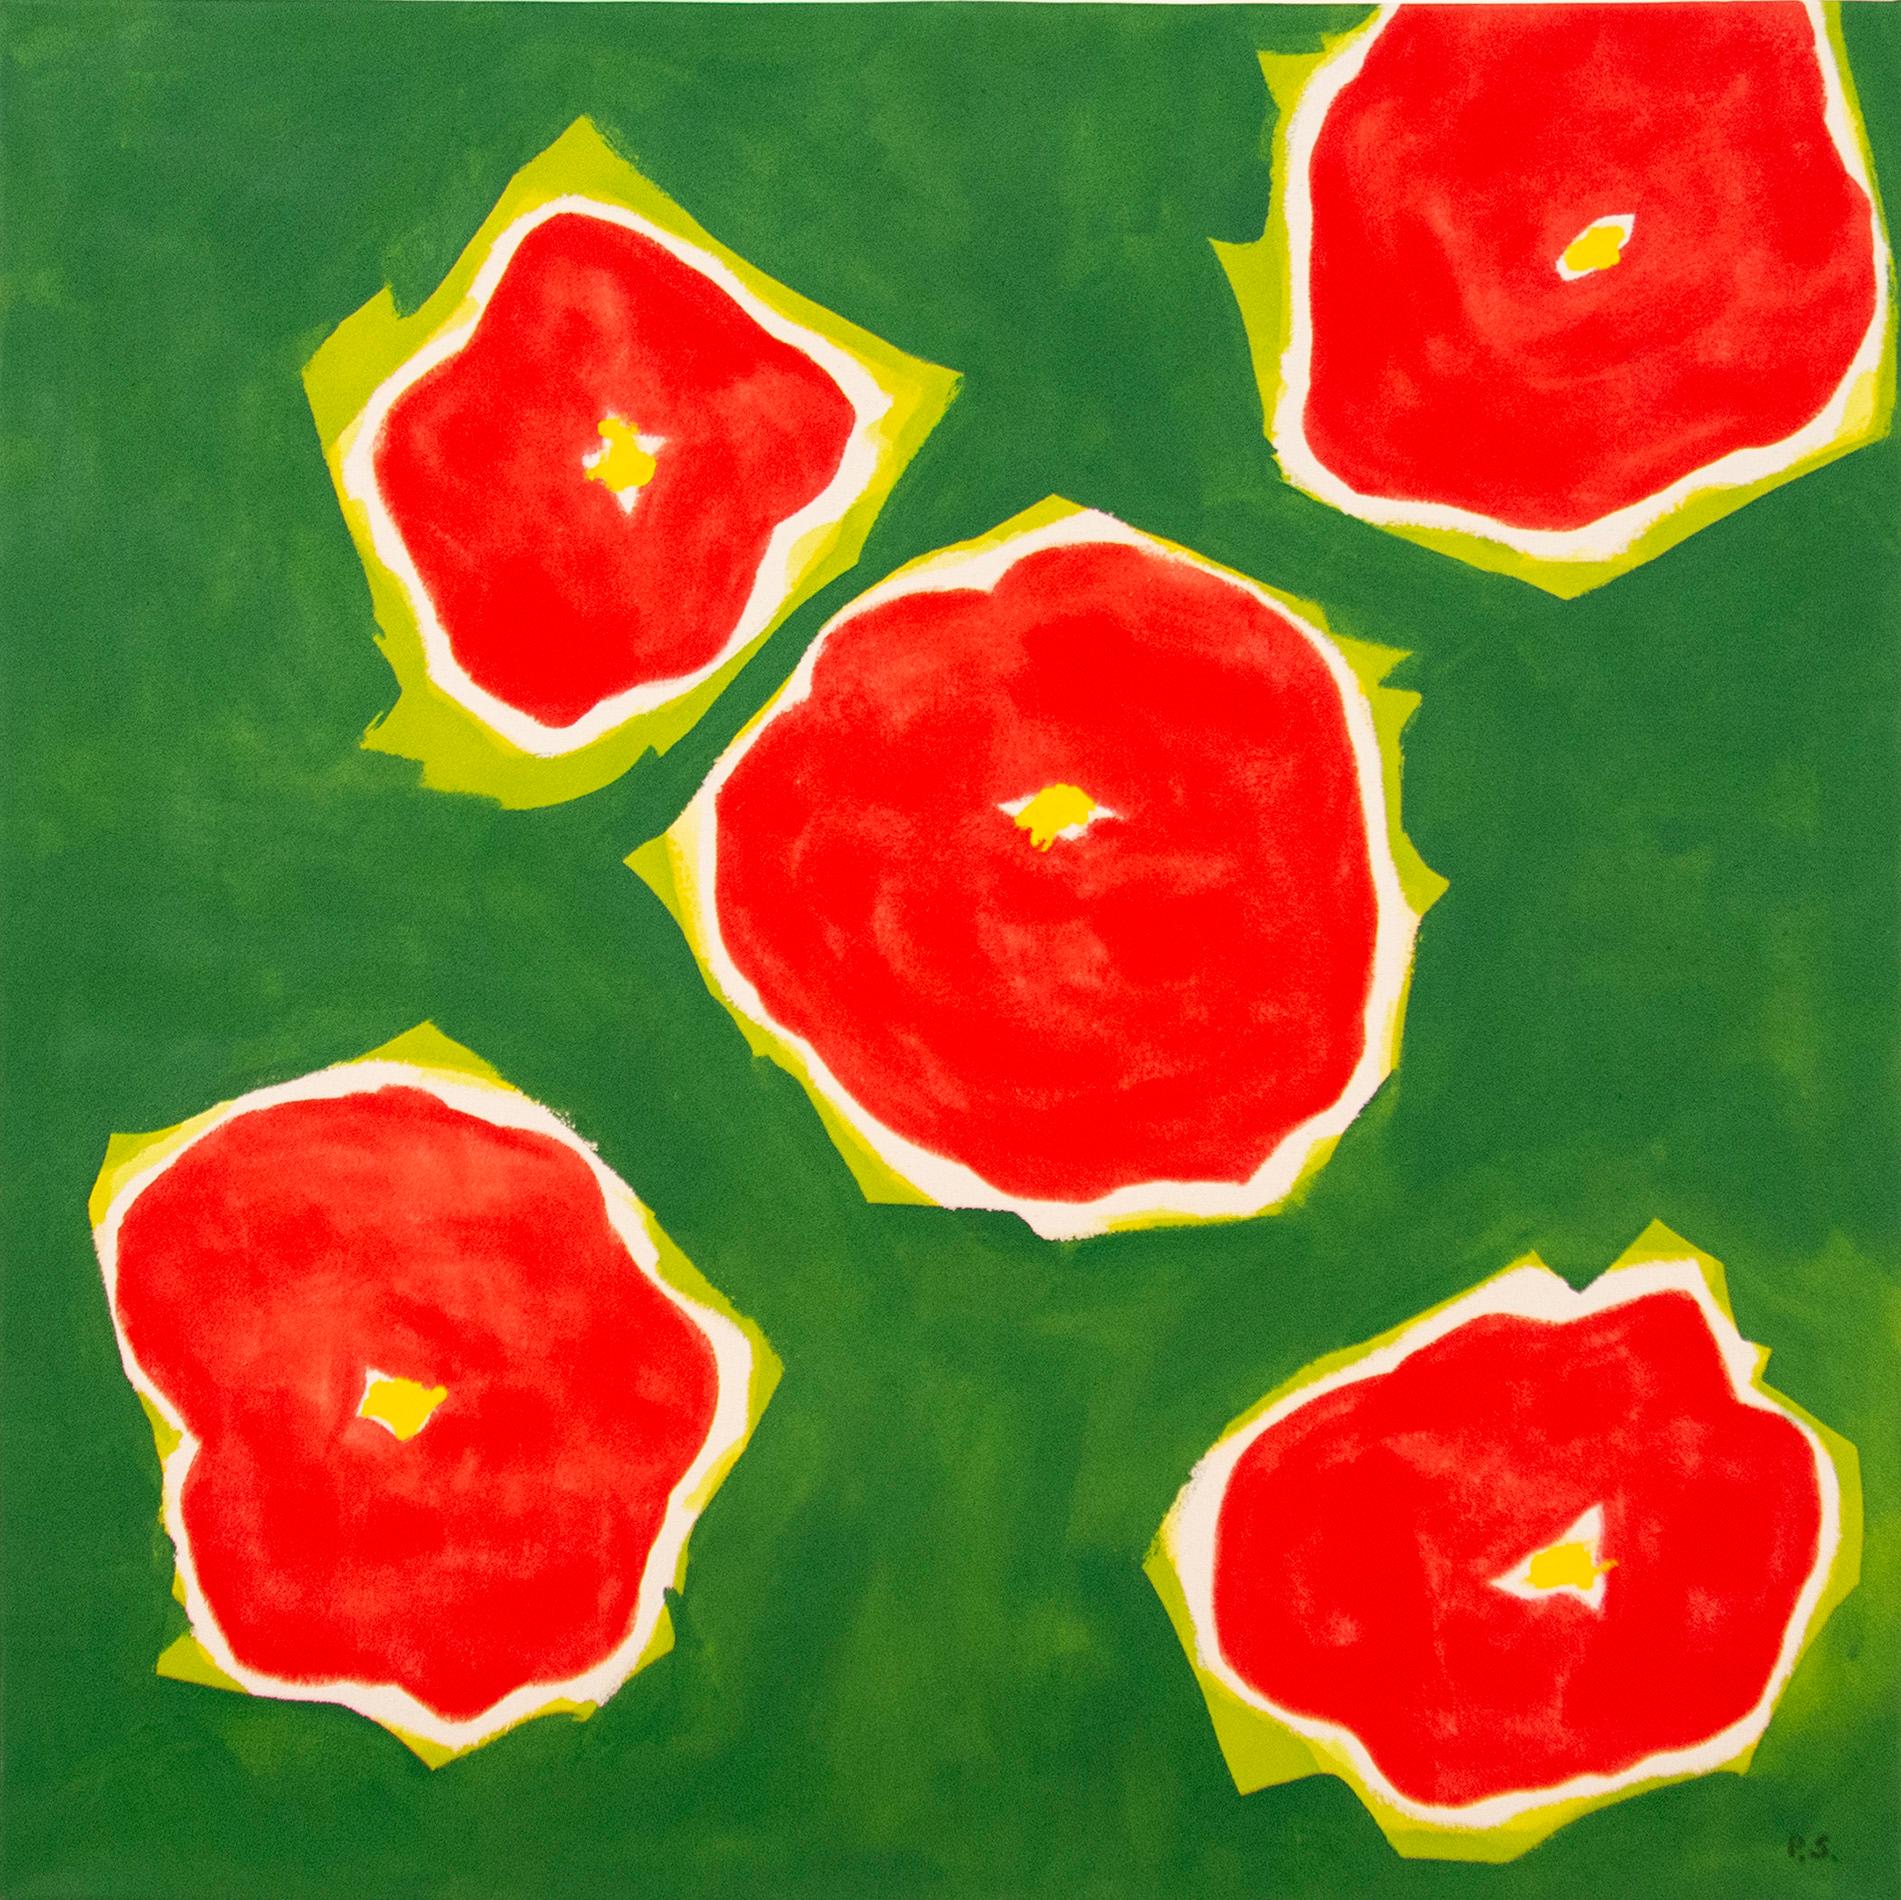 Pat Service Still-Life Painting - Five Flowers Red on Green - colorful, minimal, abstract, floral, oil on canvas